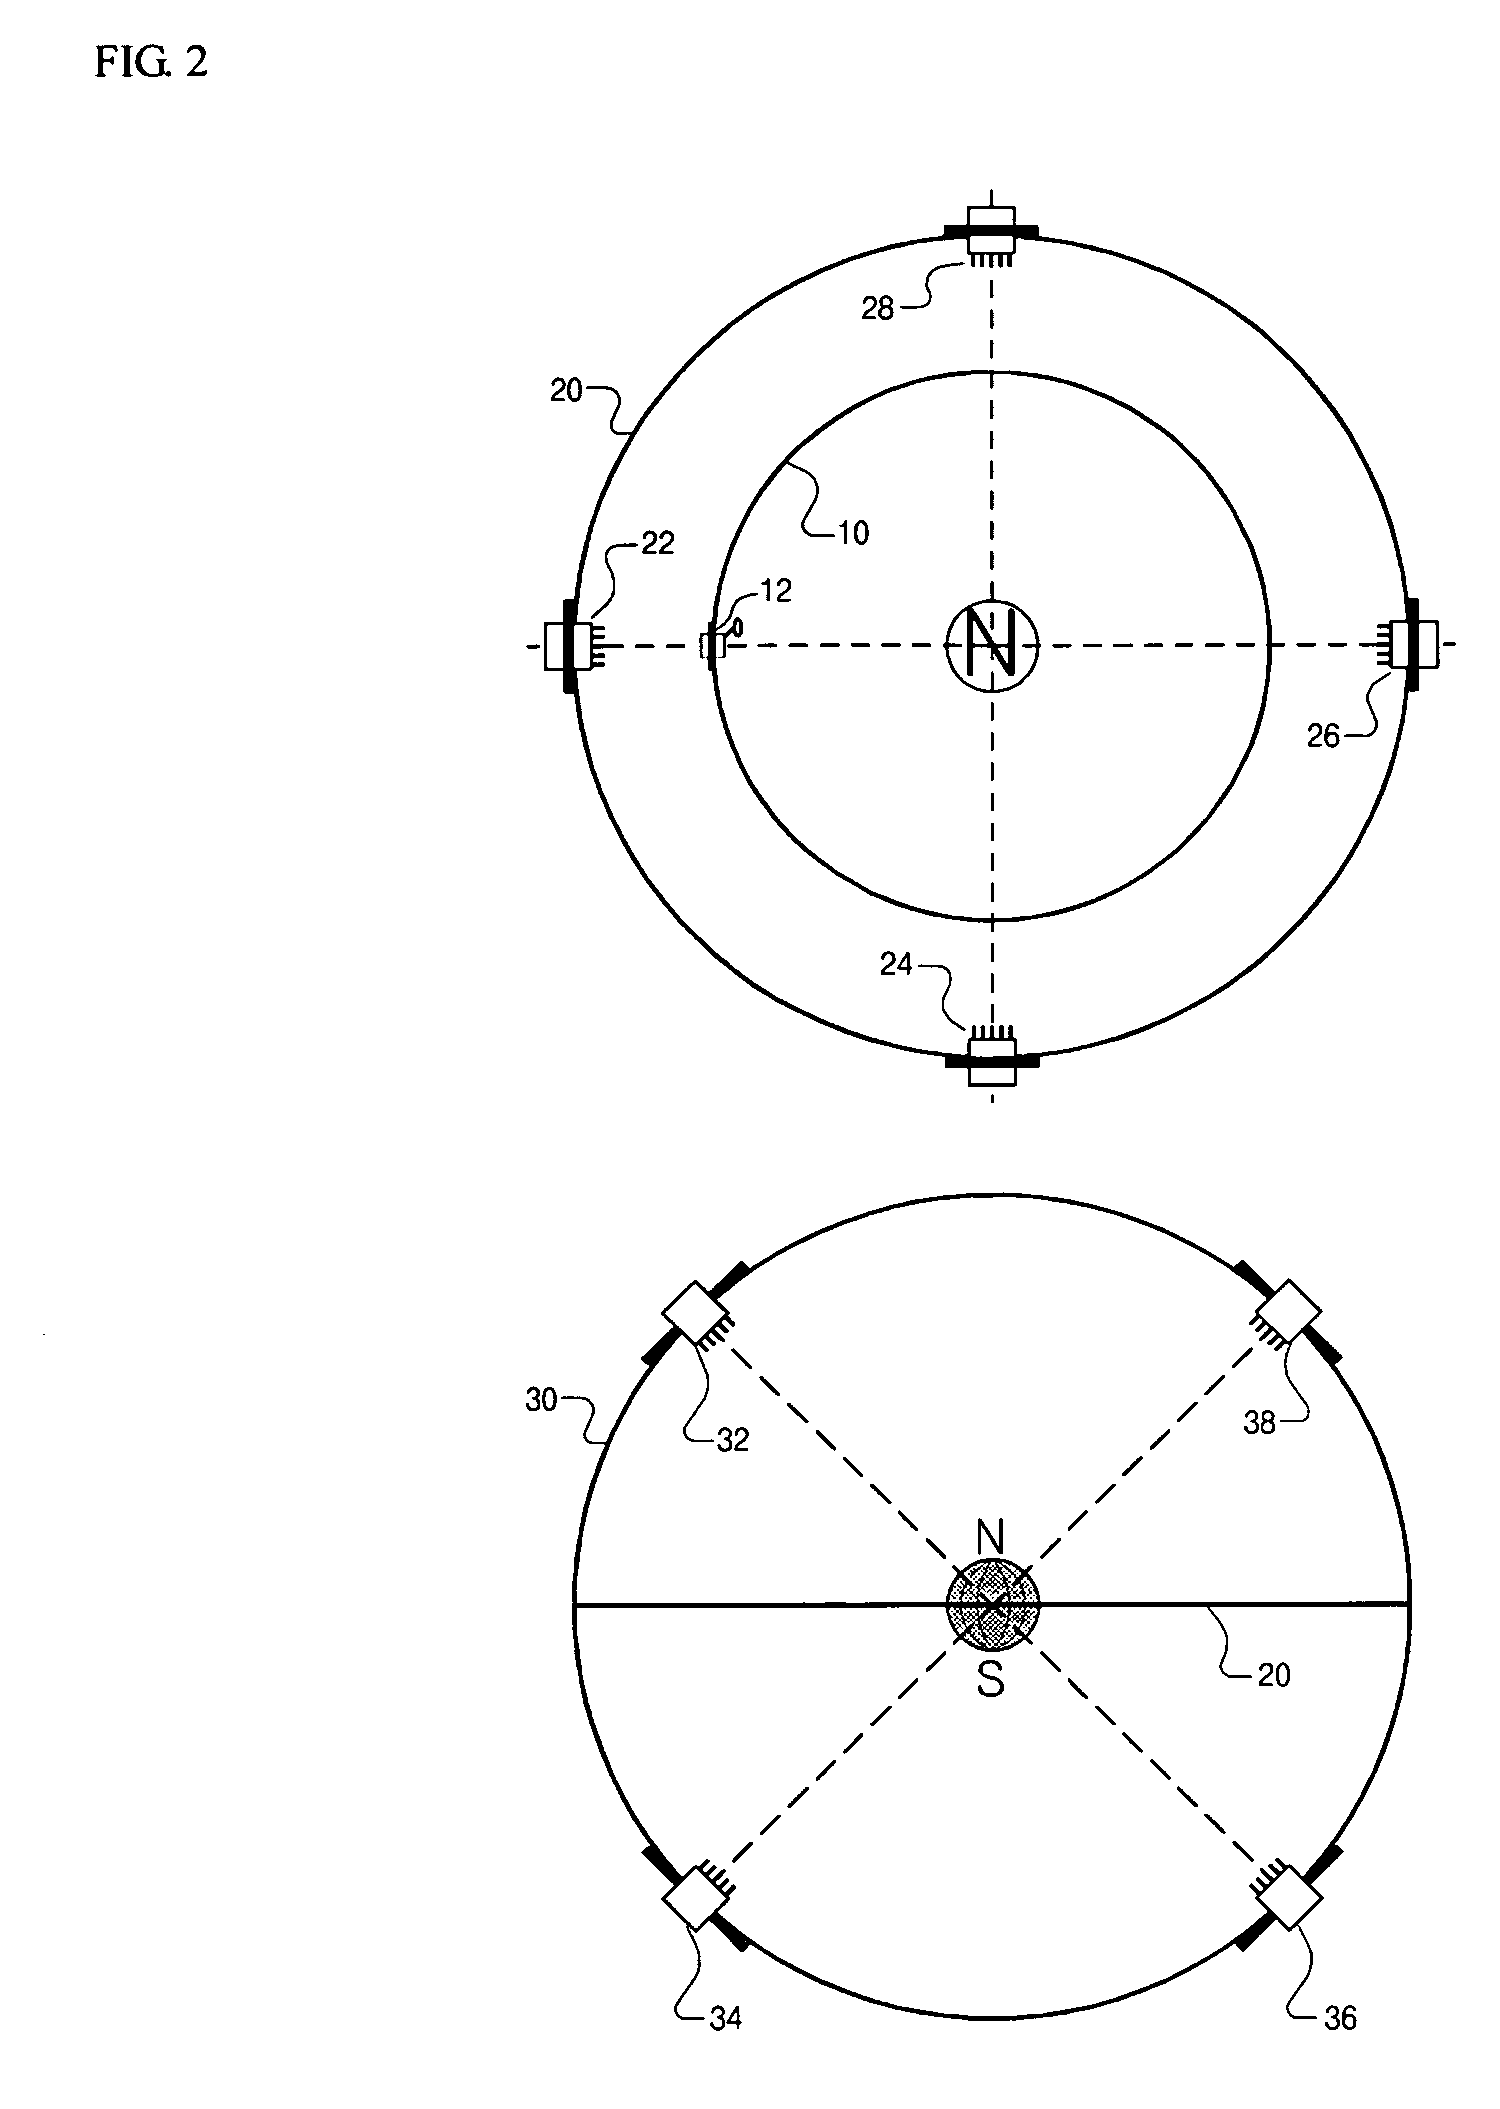 Positioning system for a geostationary satellite